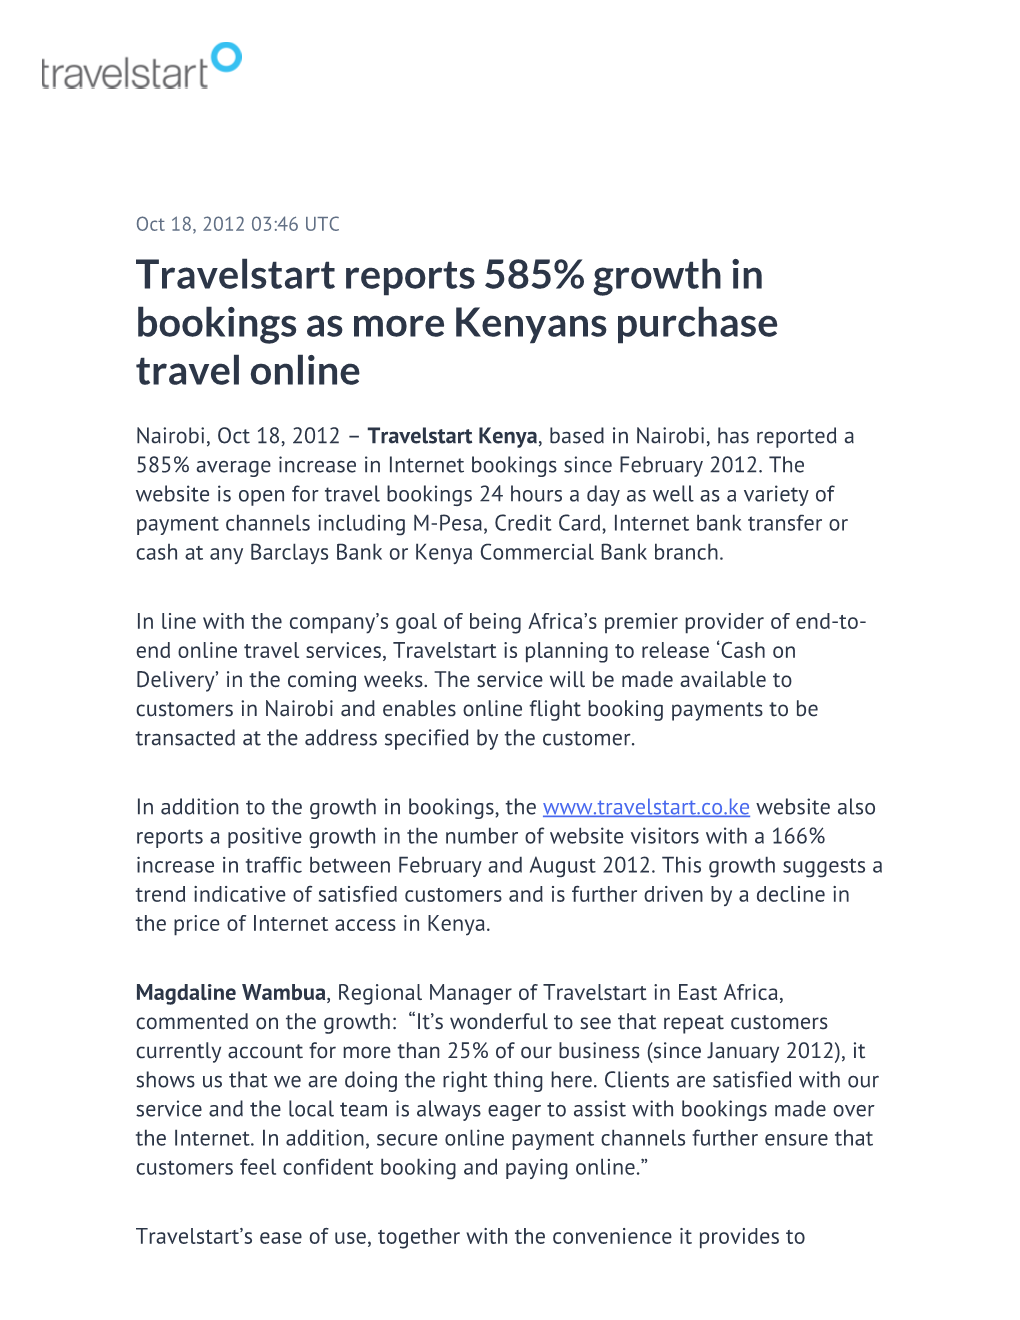 Travelstart Reports 585% Growth in Bookings As More Kenyans Purchase Travel Online